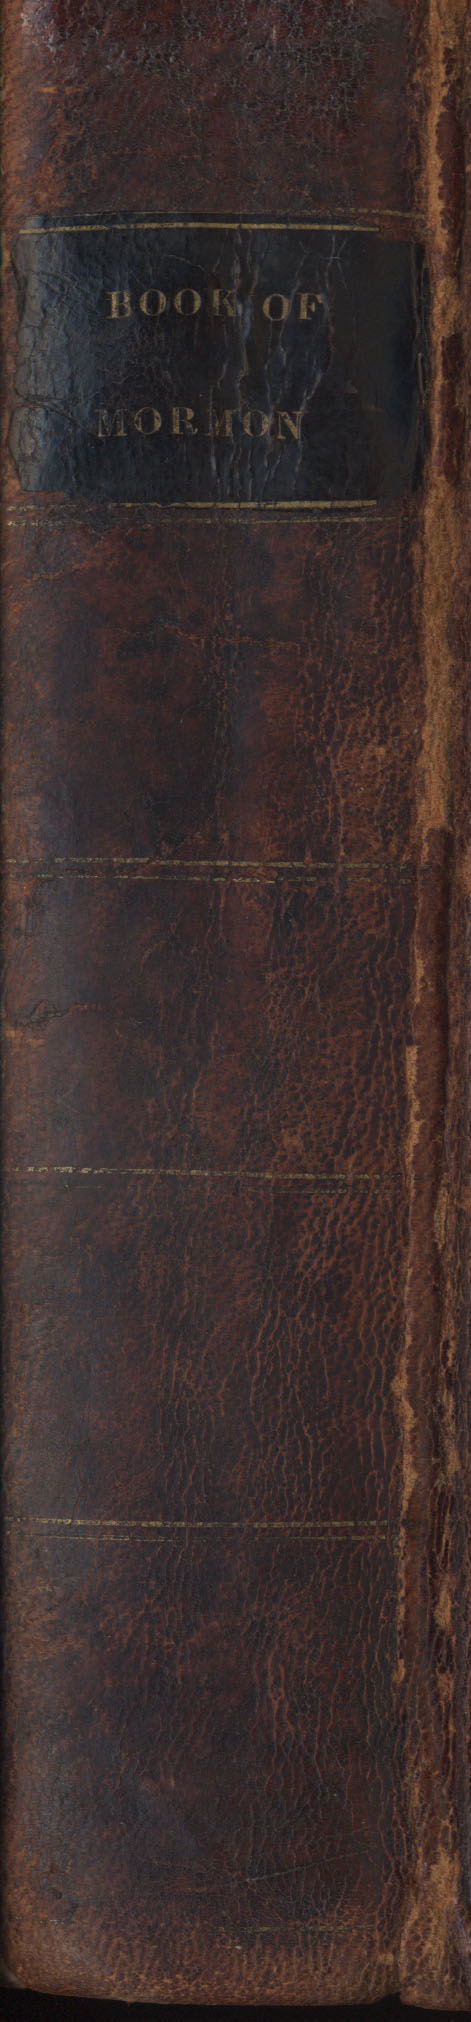 leather book spine texture